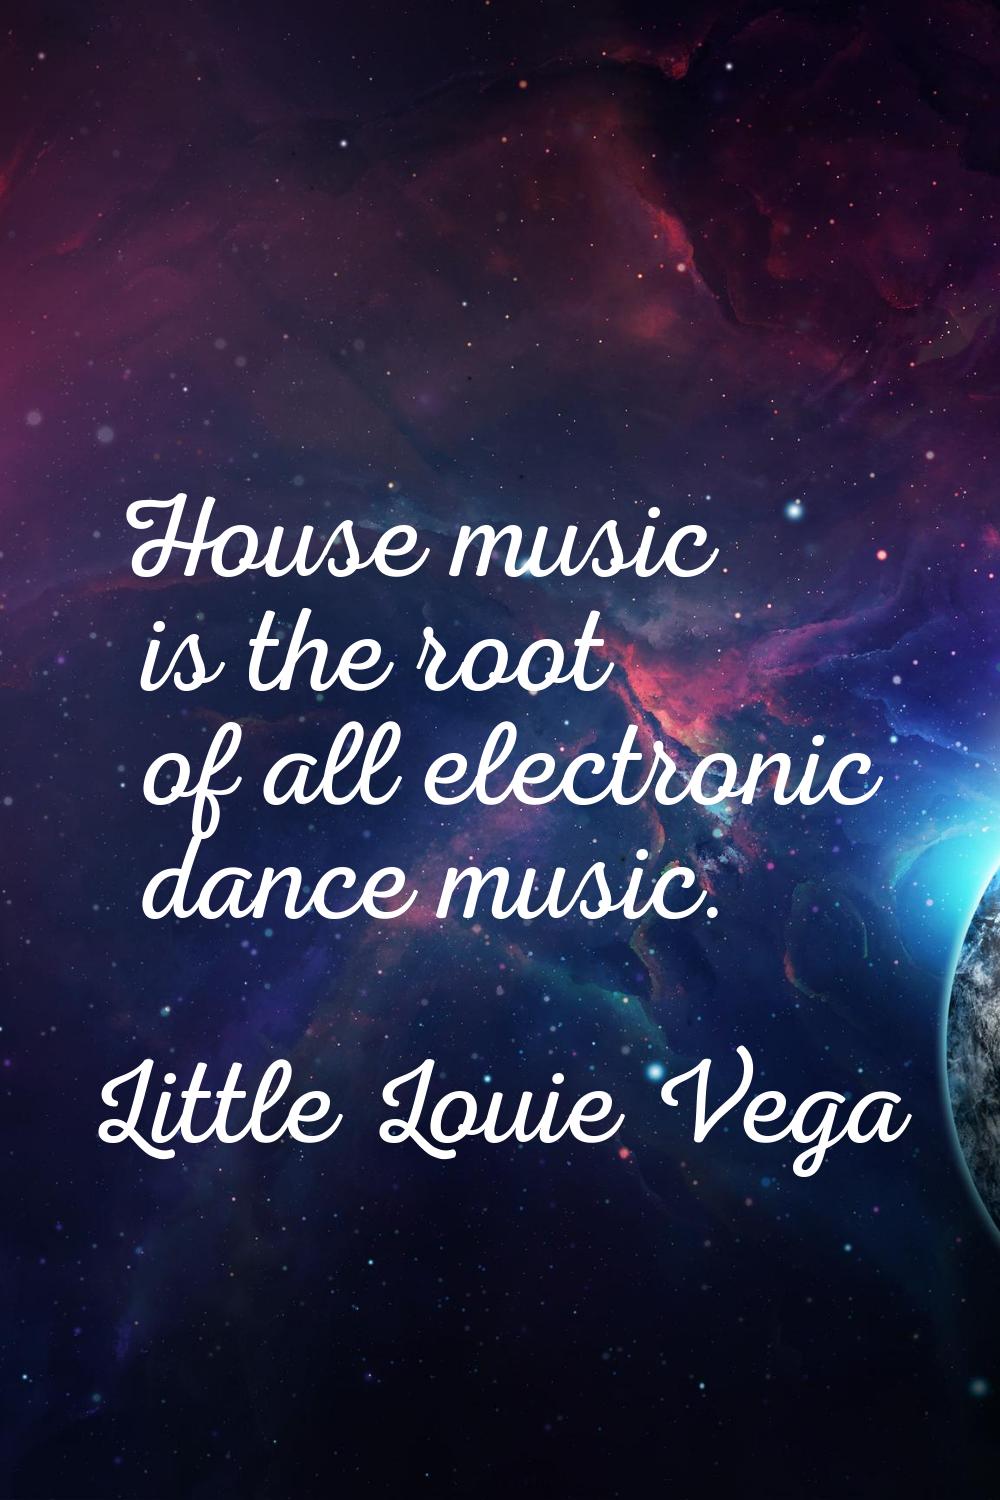 House music is the root of all electronic dance music.